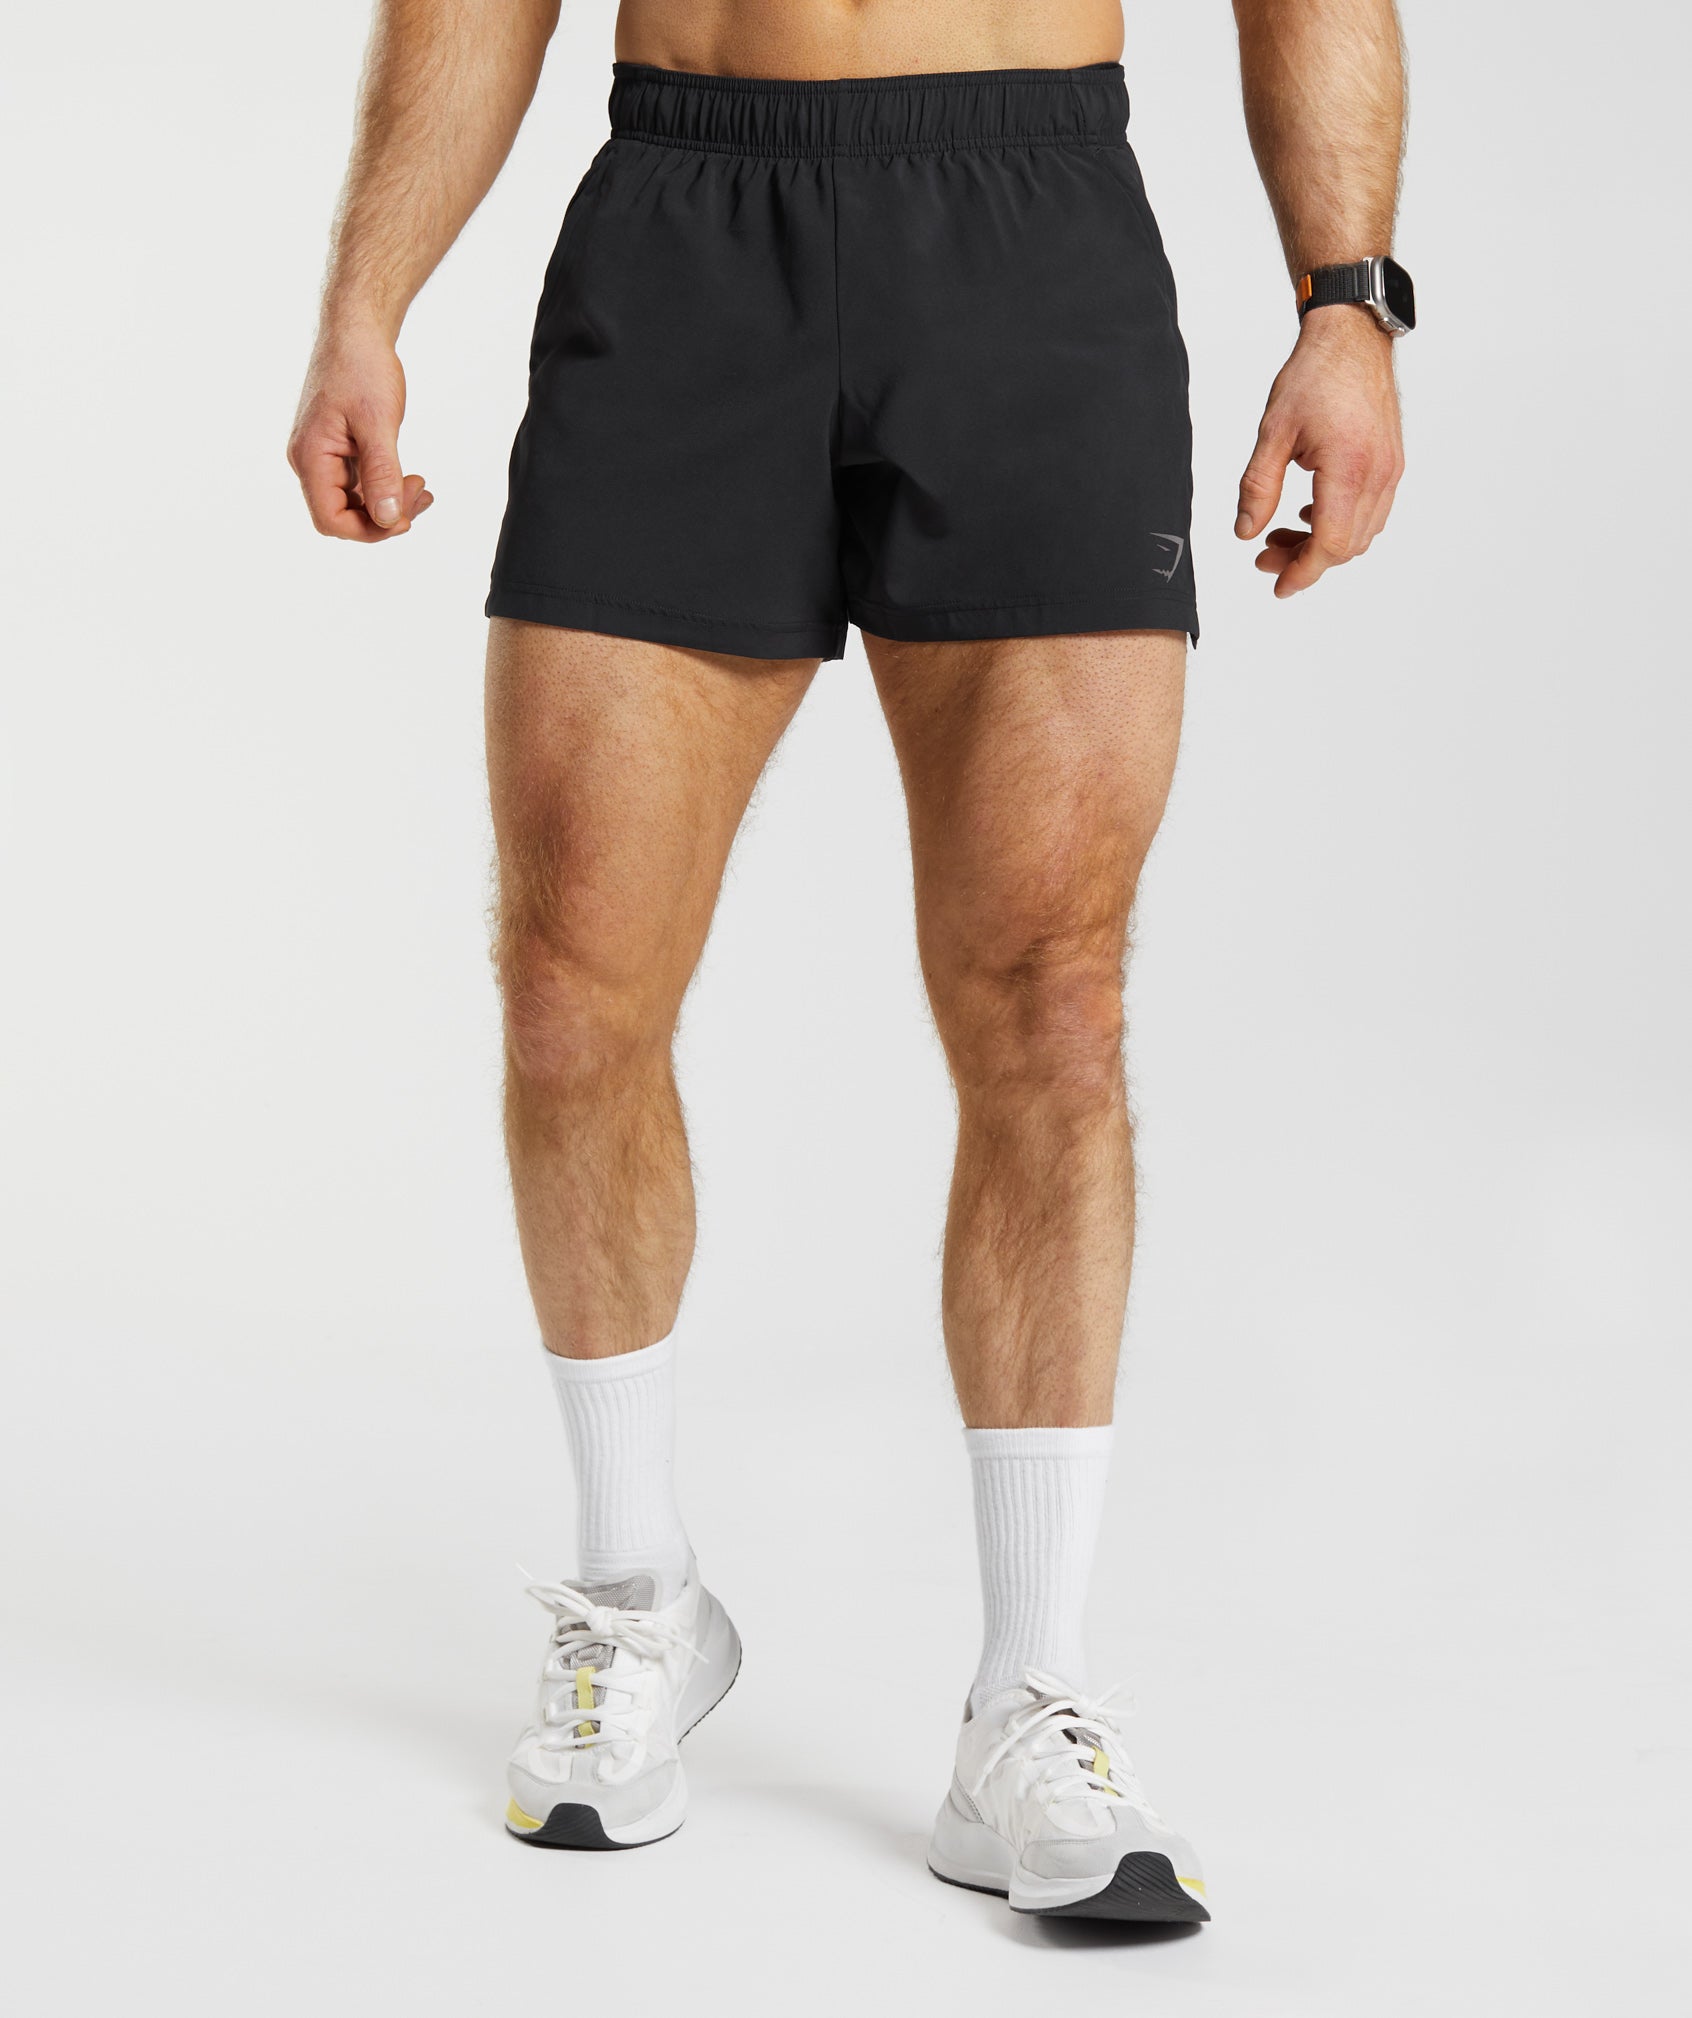  Mens Athletic Shorts With Pockets